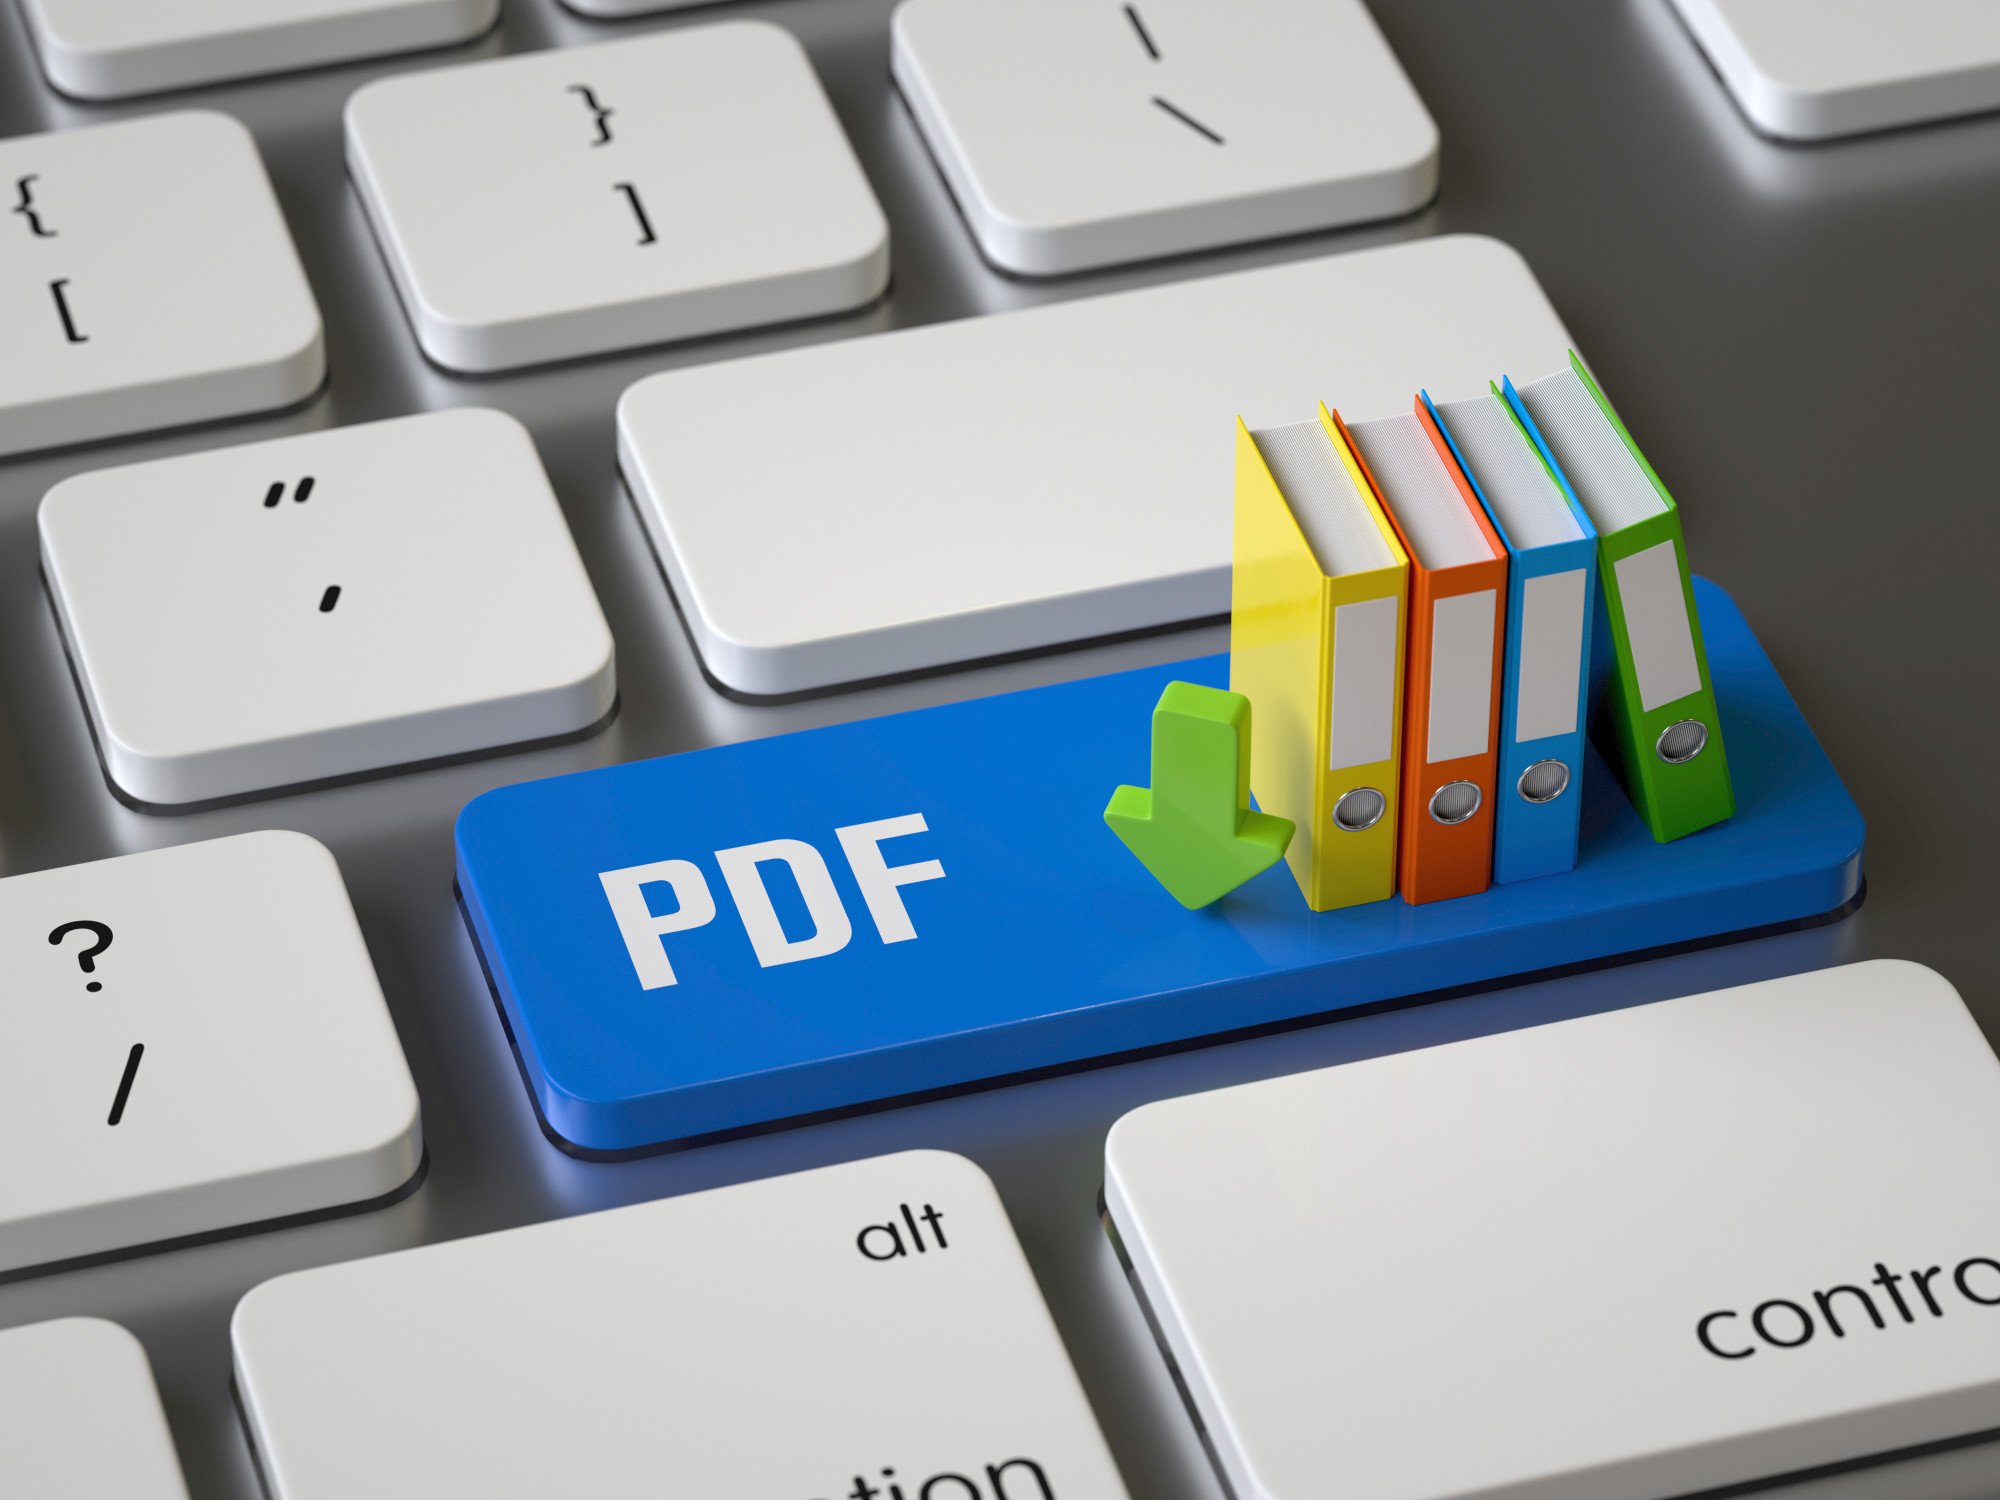 convert PDF files into Word documents